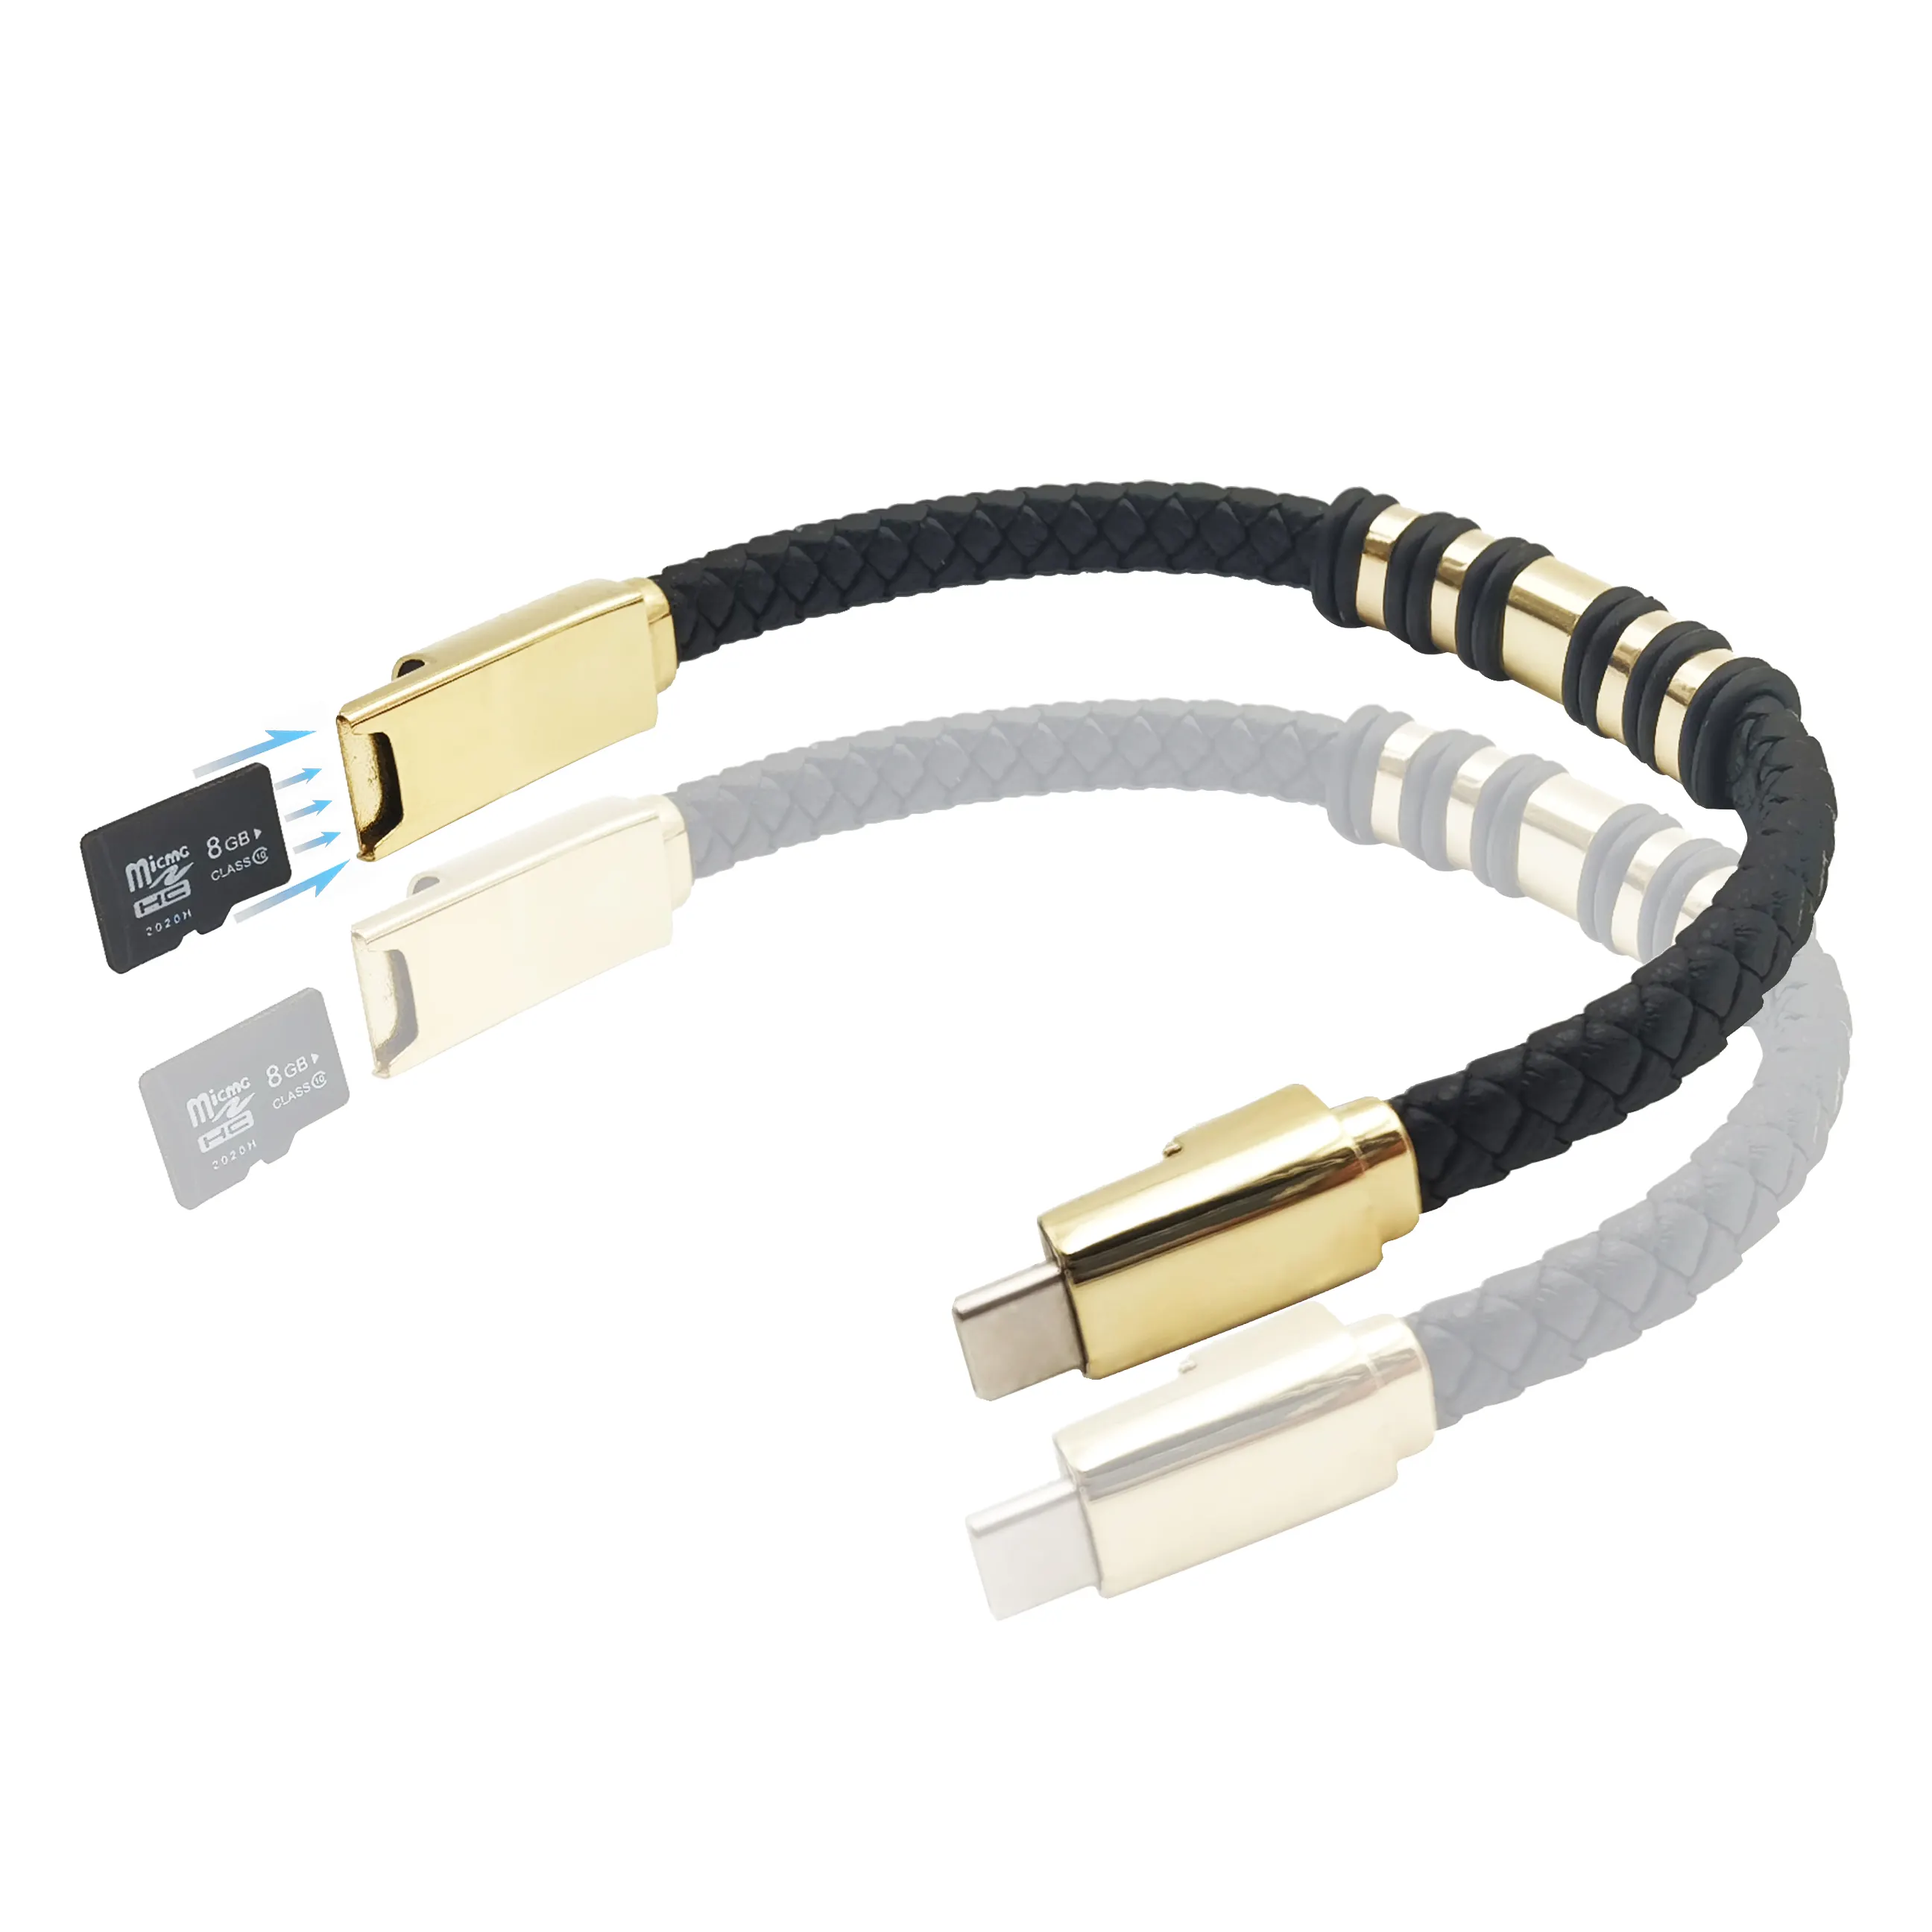 Leather Bracelet 20cm Short USB Charging Data Cable For Iphone Type C Micro Charger,SD card can be inserted